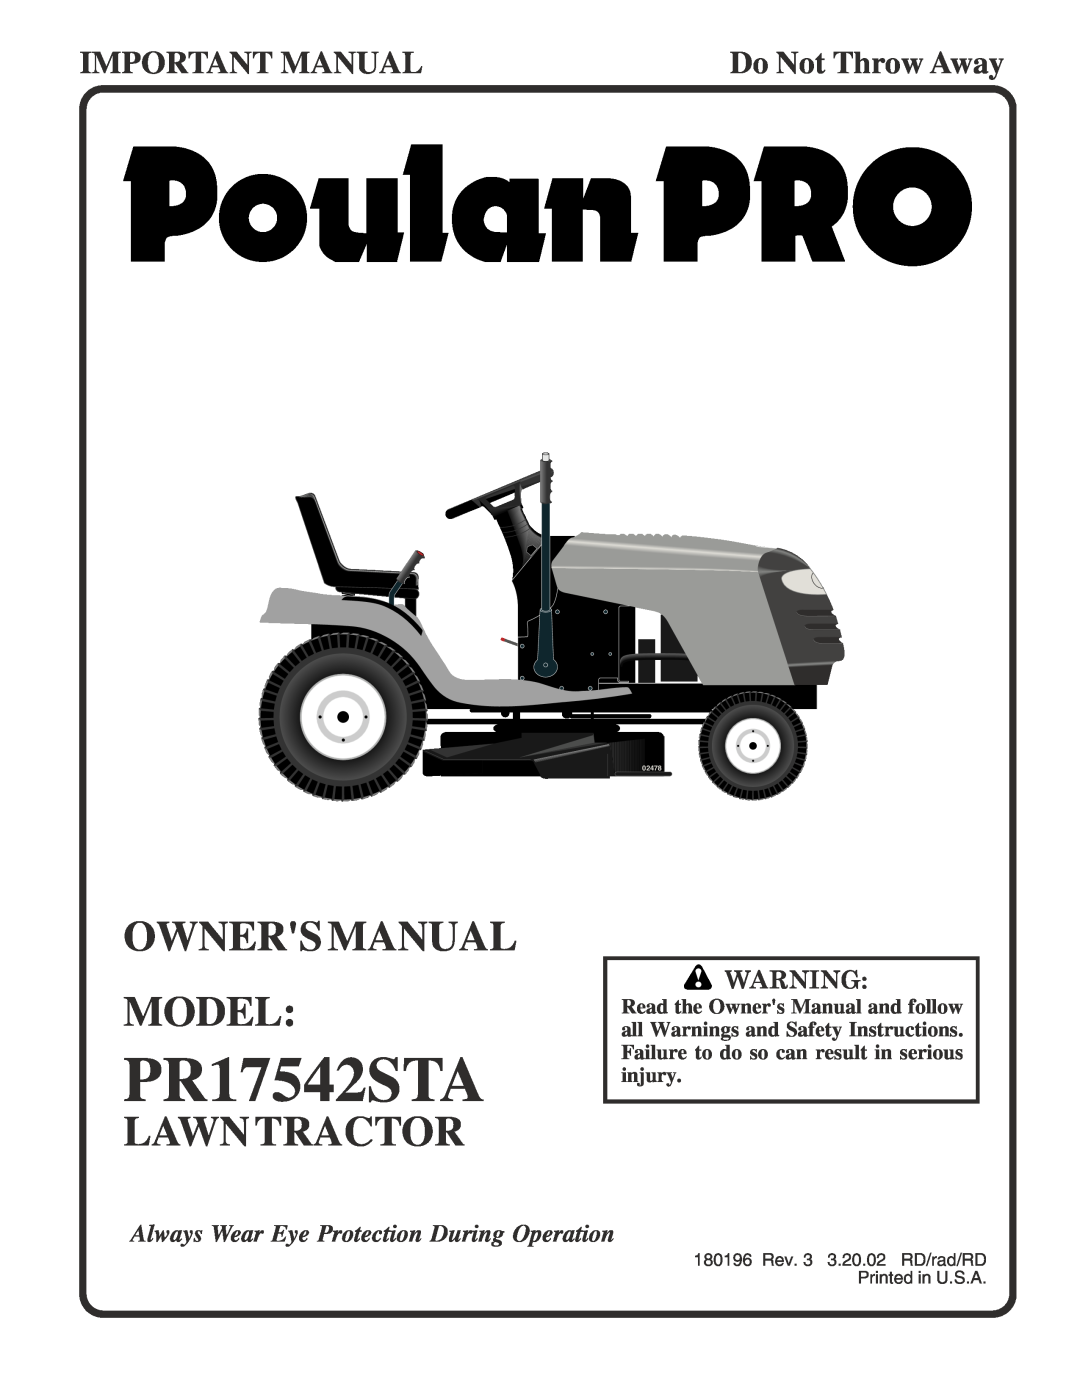 Poulan 180196 owner manual Lawntractor, PR17542STA, Important Manual, Do Not Throw Away, 02478 